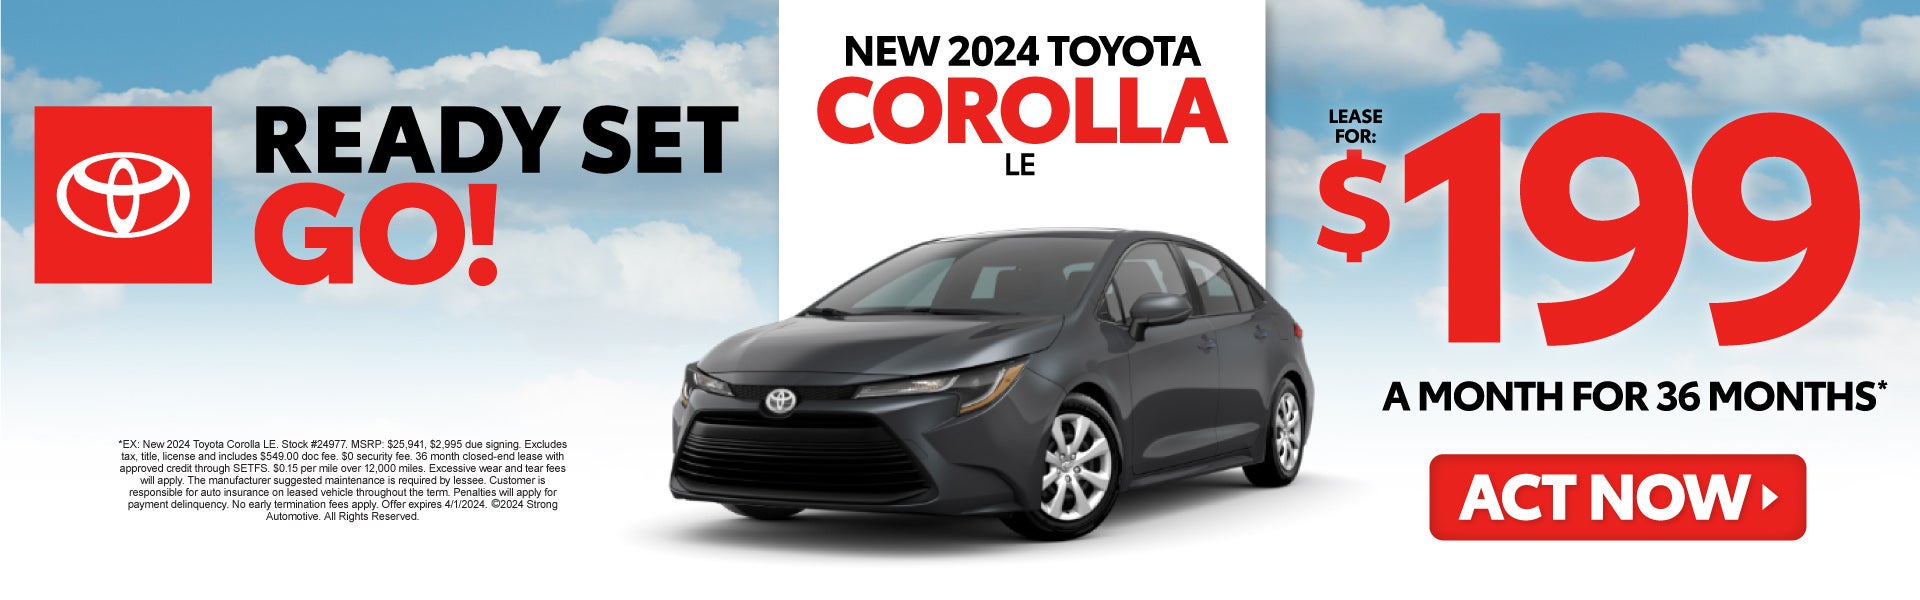 New 2024 Toyota Corolla LE $199/mo for 36 months* - Act Now